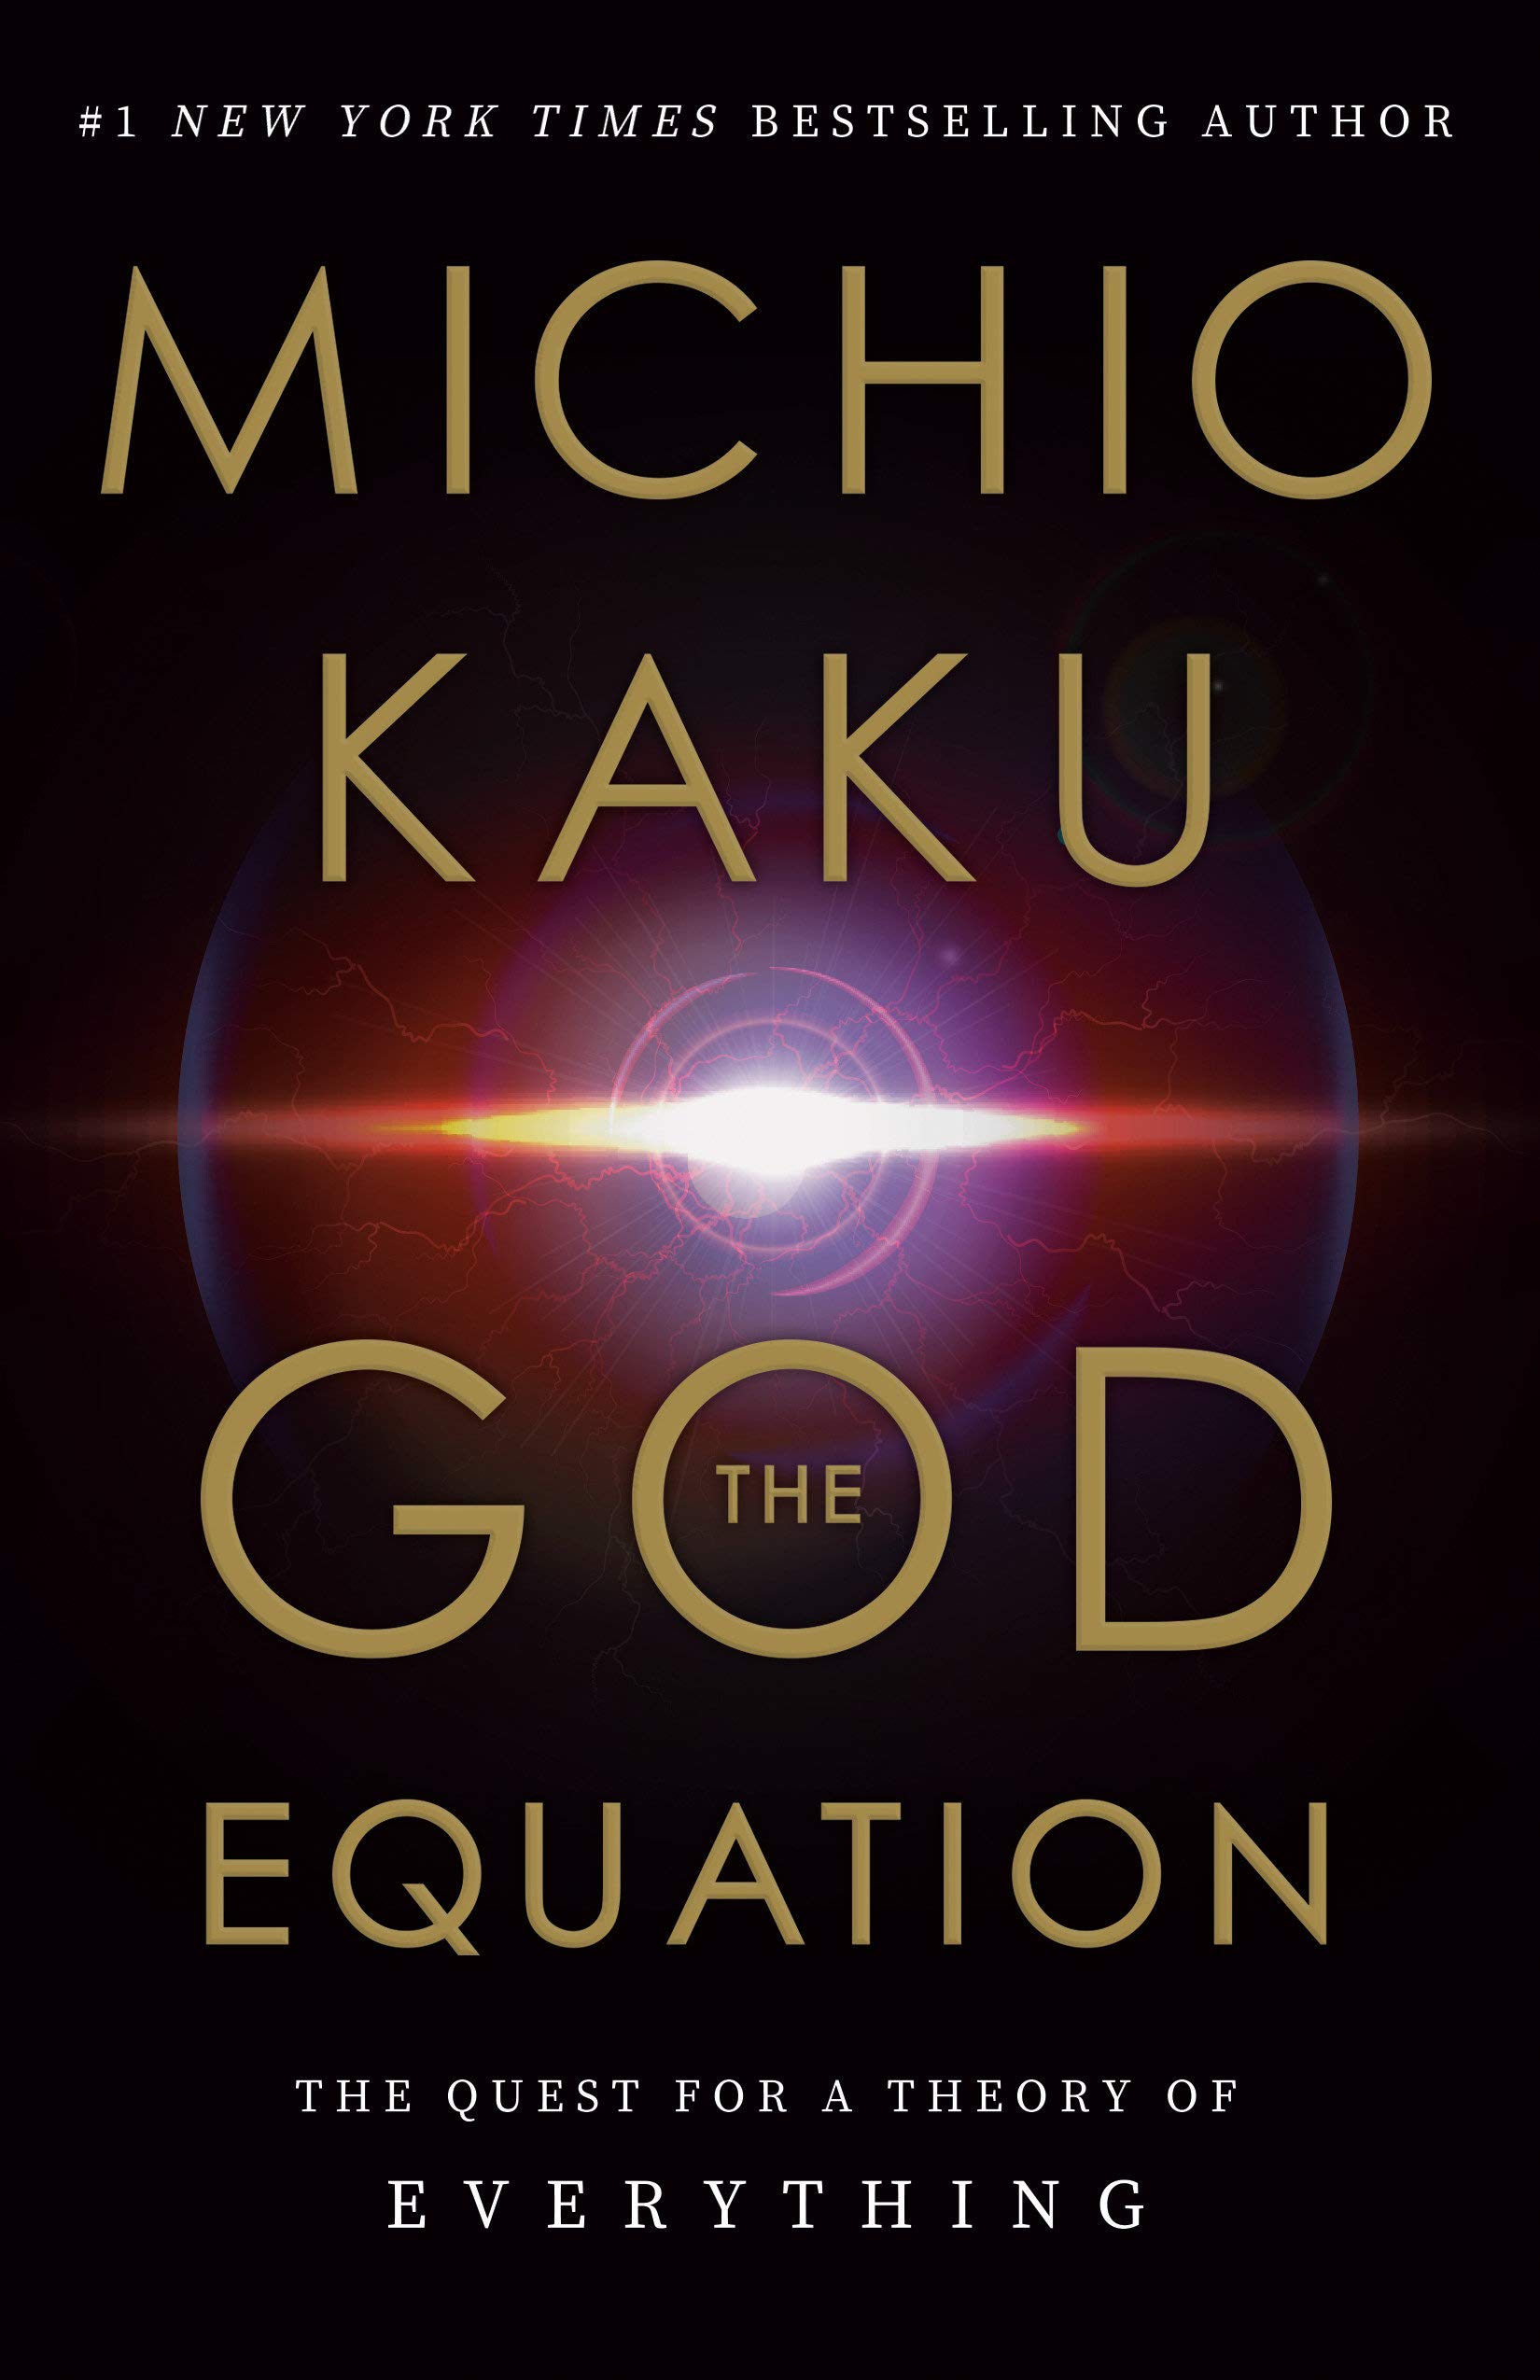 The God Equation: The Quest for a Theory of Everything, by Michio Kaku-Excellent & Brilliant Science Books